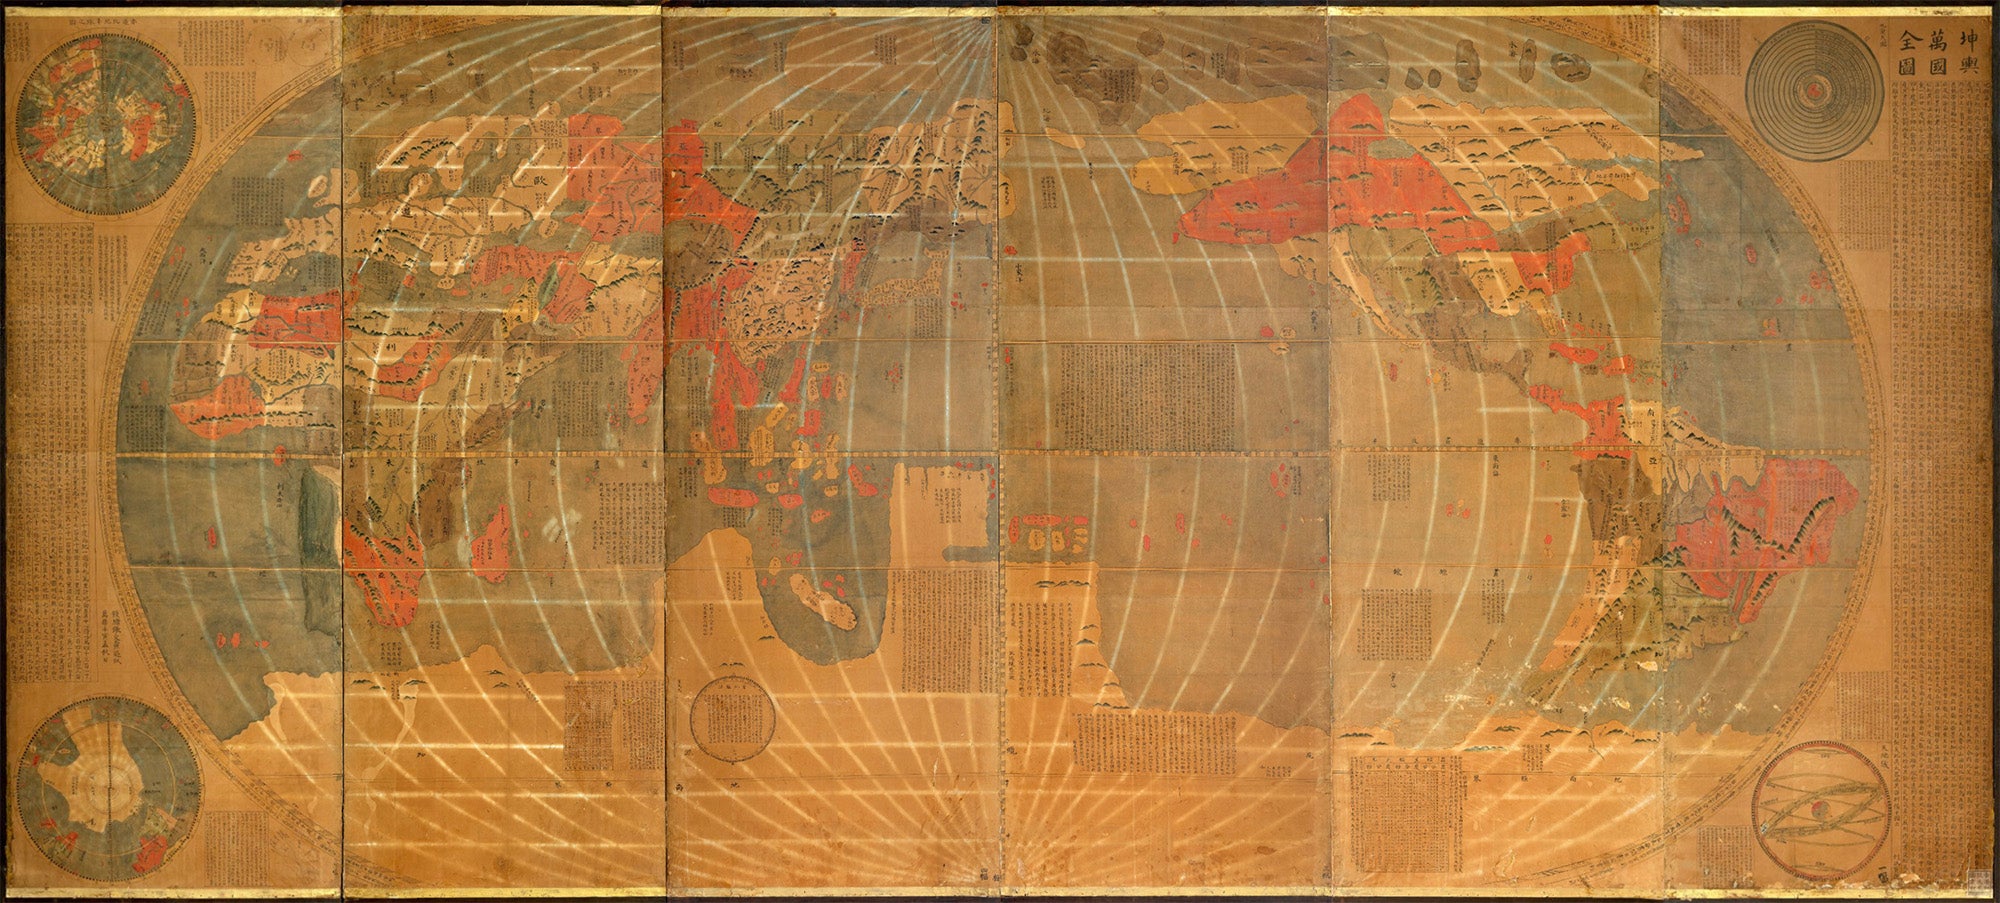 The map shows an oval shaped world map, includes insets of astronomical and seasonal maps. On top right is "Seventh Heaven"(九重天圖) chart; on bottom right is "Armillary sphere"; on top left is a map of "Northern Hemisphere", "Solar and Lunar Eclipse" chart; and on bottom left is a map of "Southern Hemisphere", map of "Chinese 24 seasonal segments calendar" and "Quantity-day ruler". 